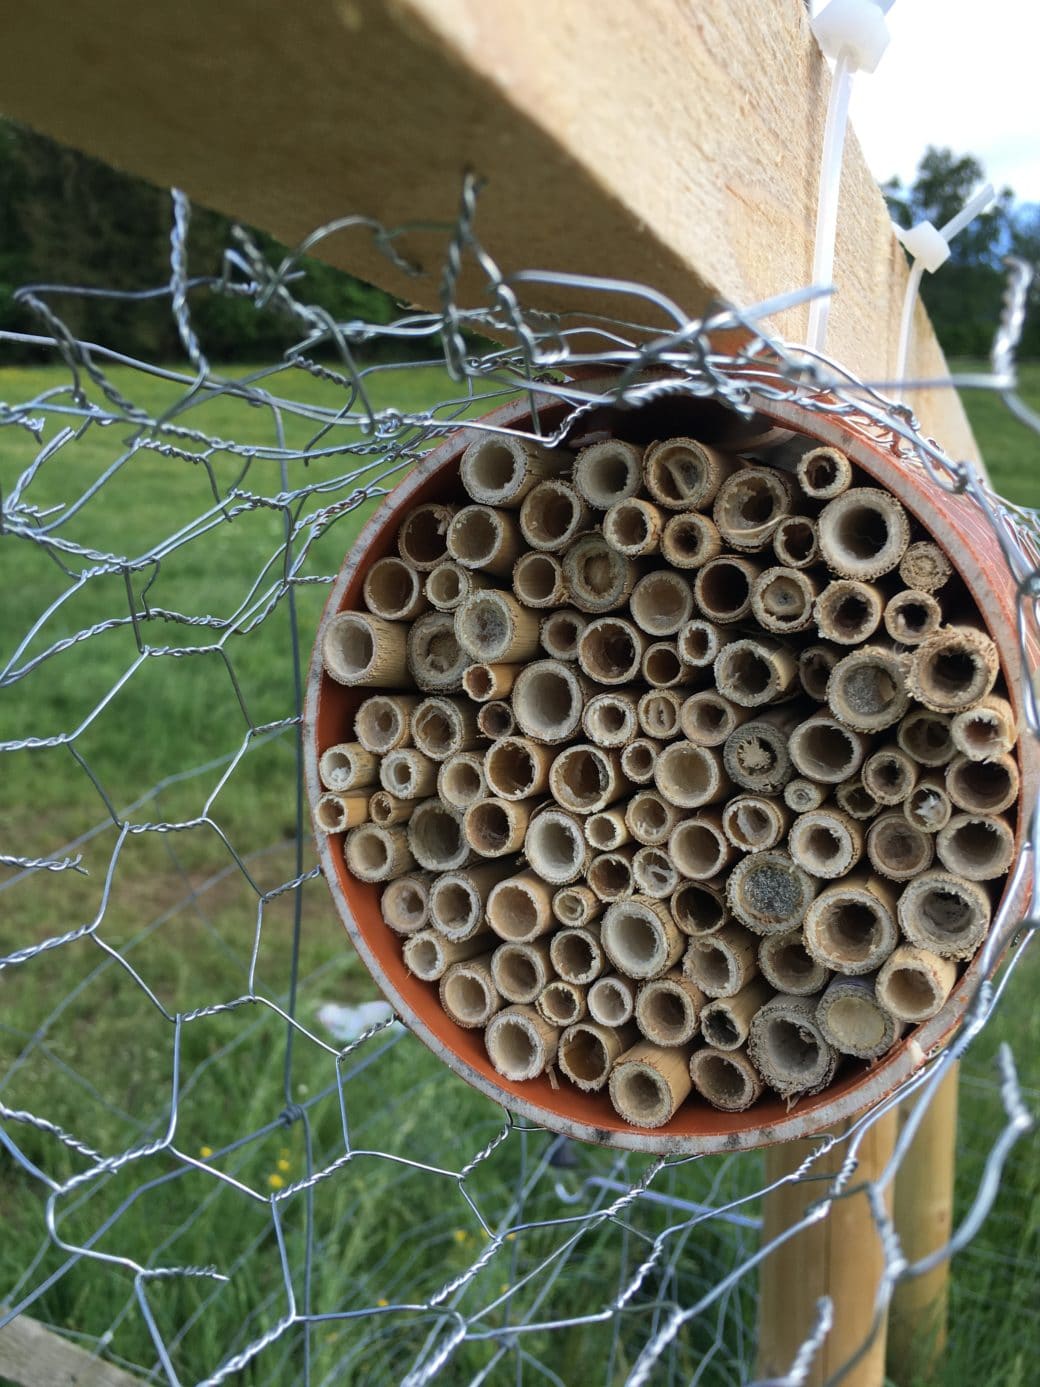 Picture: The photo shows a nesting aid for bees, which is attached with cable ties to the fence of a climate measuring station in a meadow. The nesting aid is a plastic tube, which is filled lengthwise with pith-containing plant stems in different diameters. In the stems in the photo, the pith is no longer present, so that the stem tubes are hollowed out. Around the nesting aid, a protection made of wire mesh fence is attached